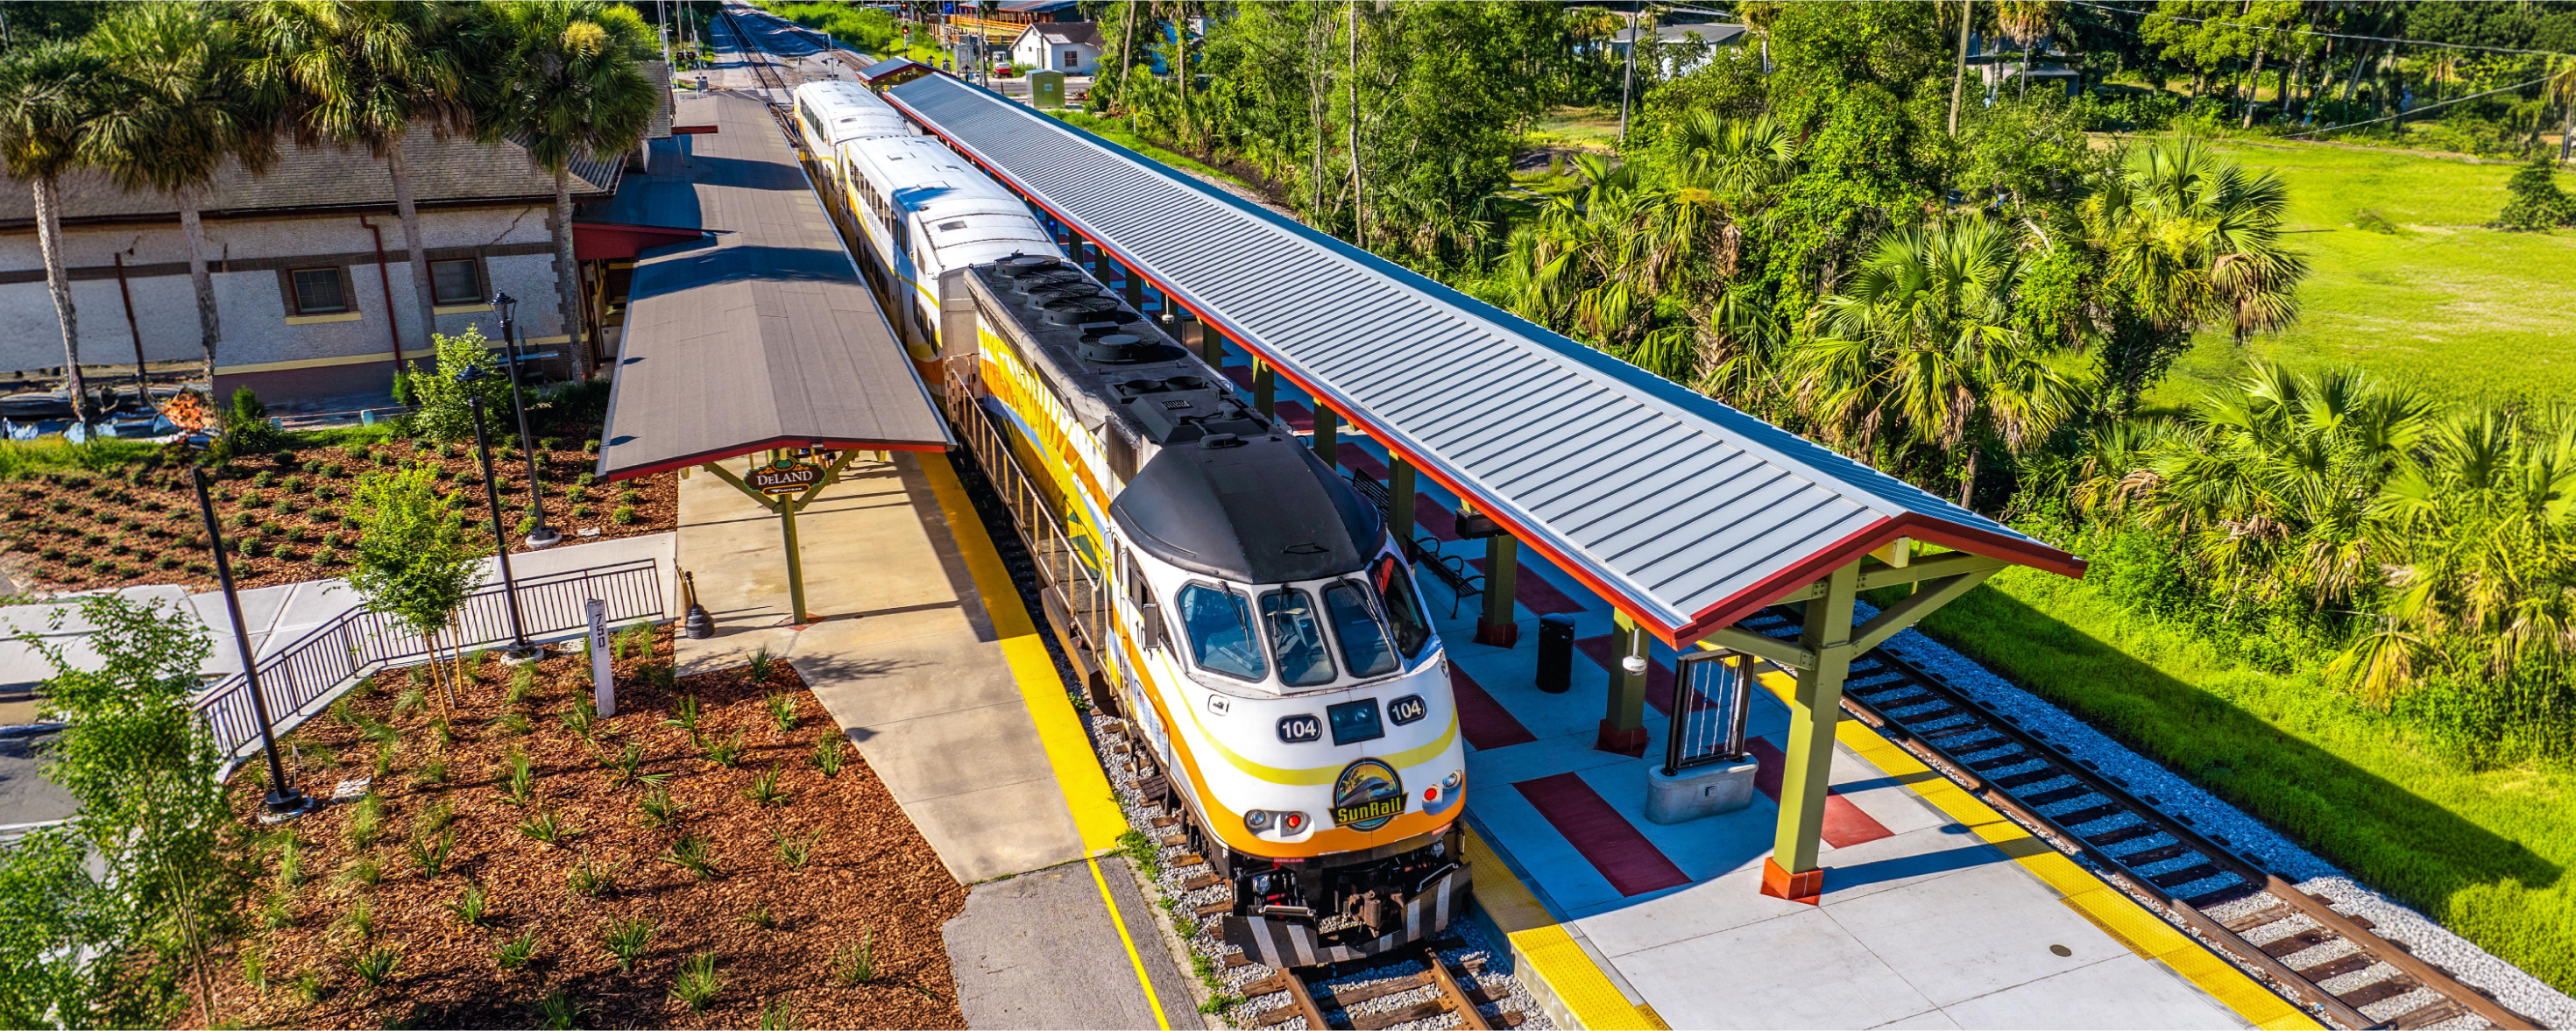 DeLand Station - BIrd's eye view of station with SunRail train at platform.